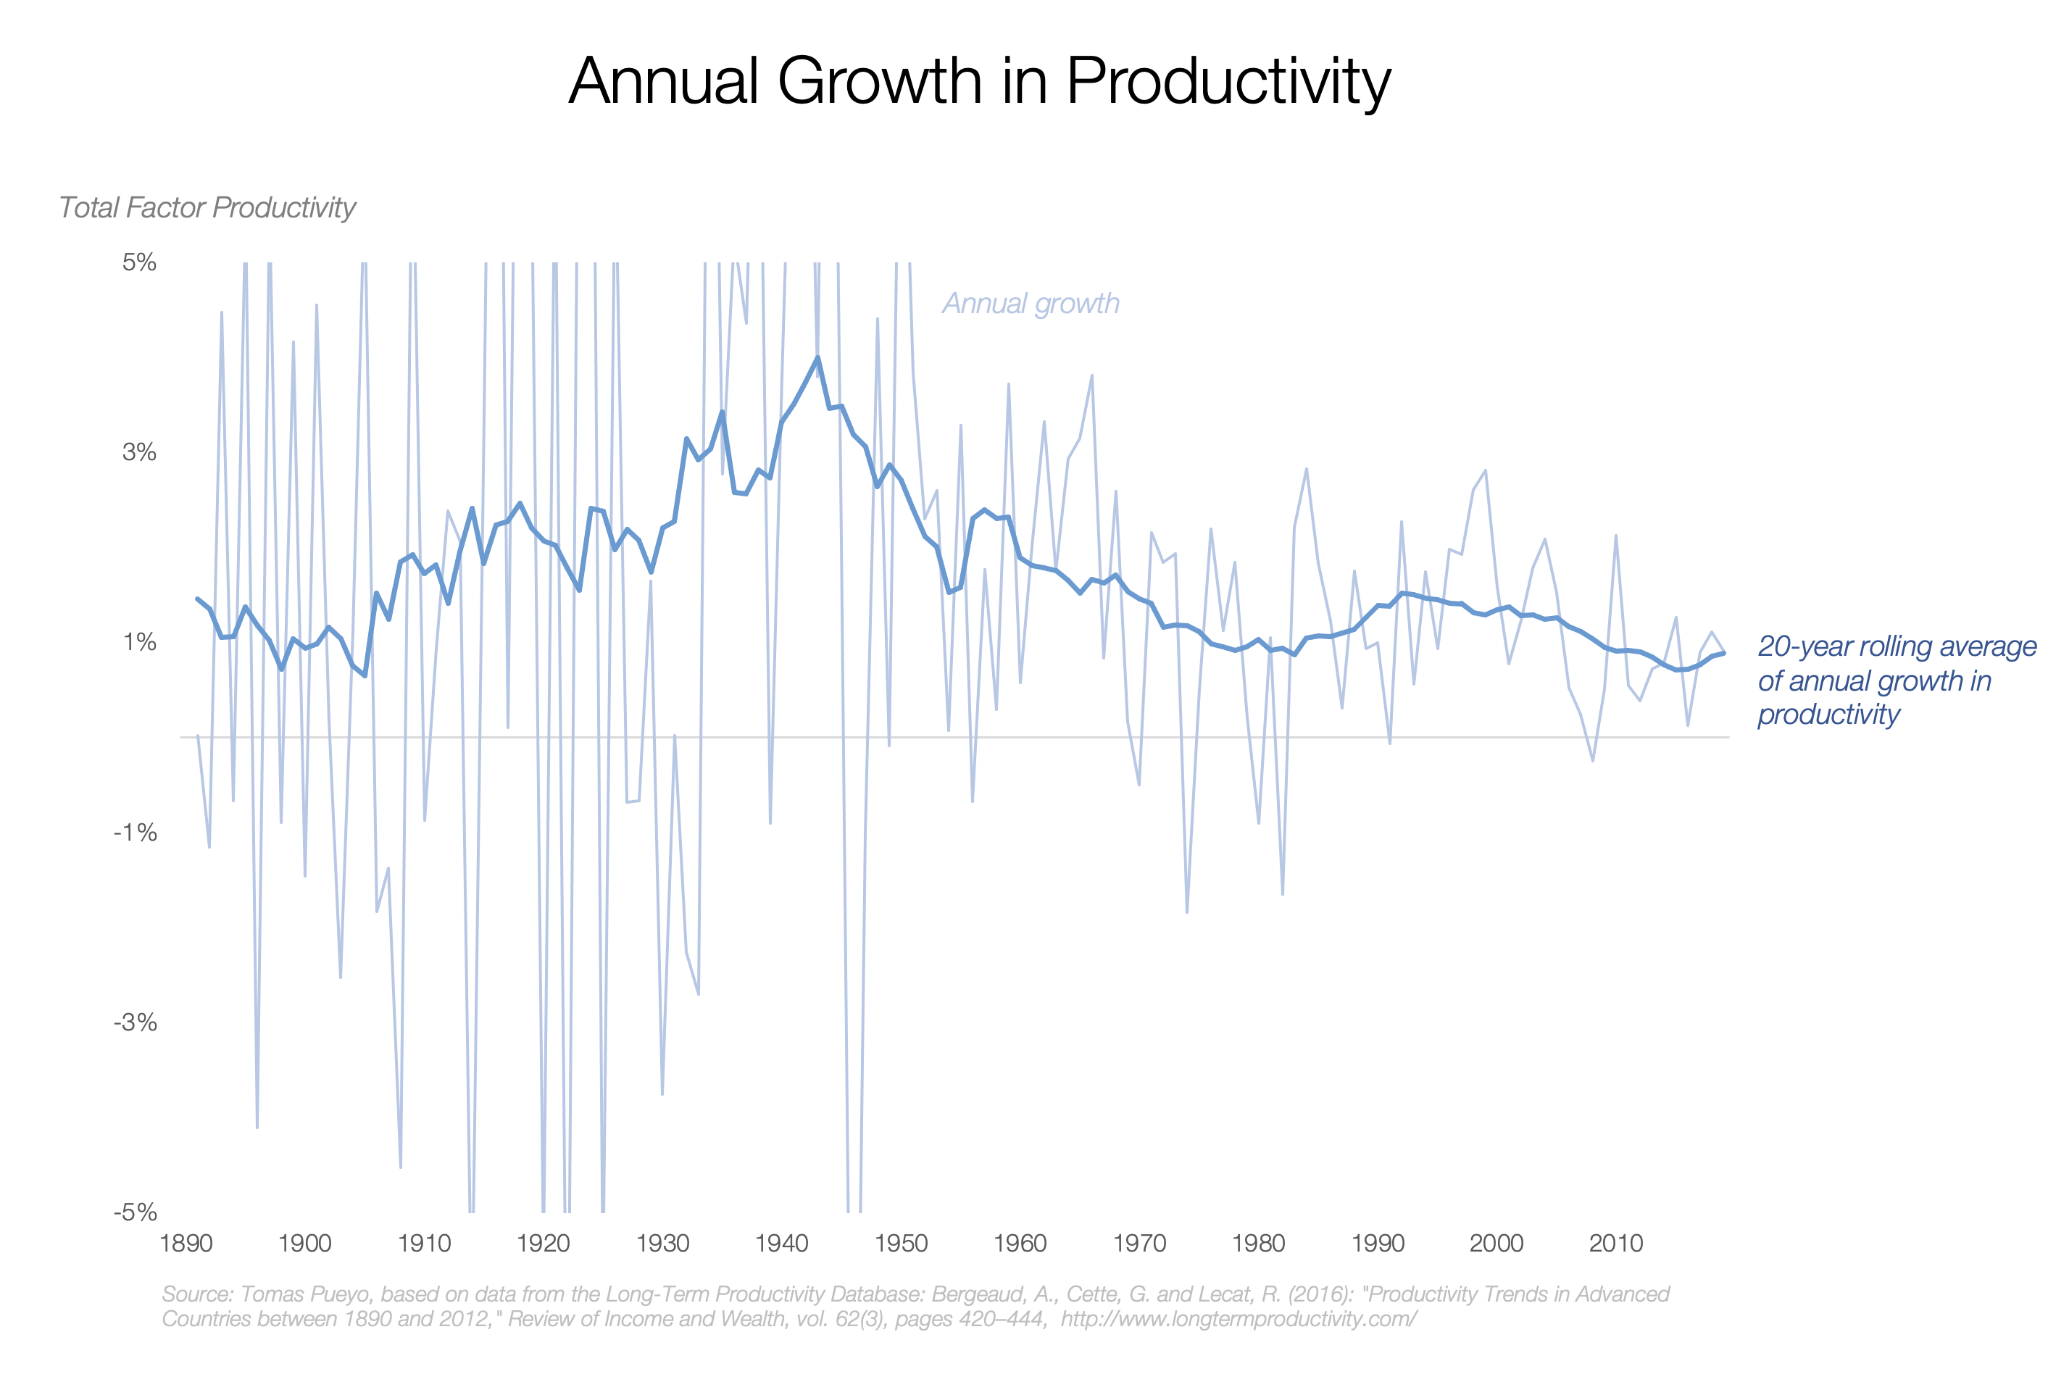 Annual Growth in Productivity, journal of wild culture ©2021